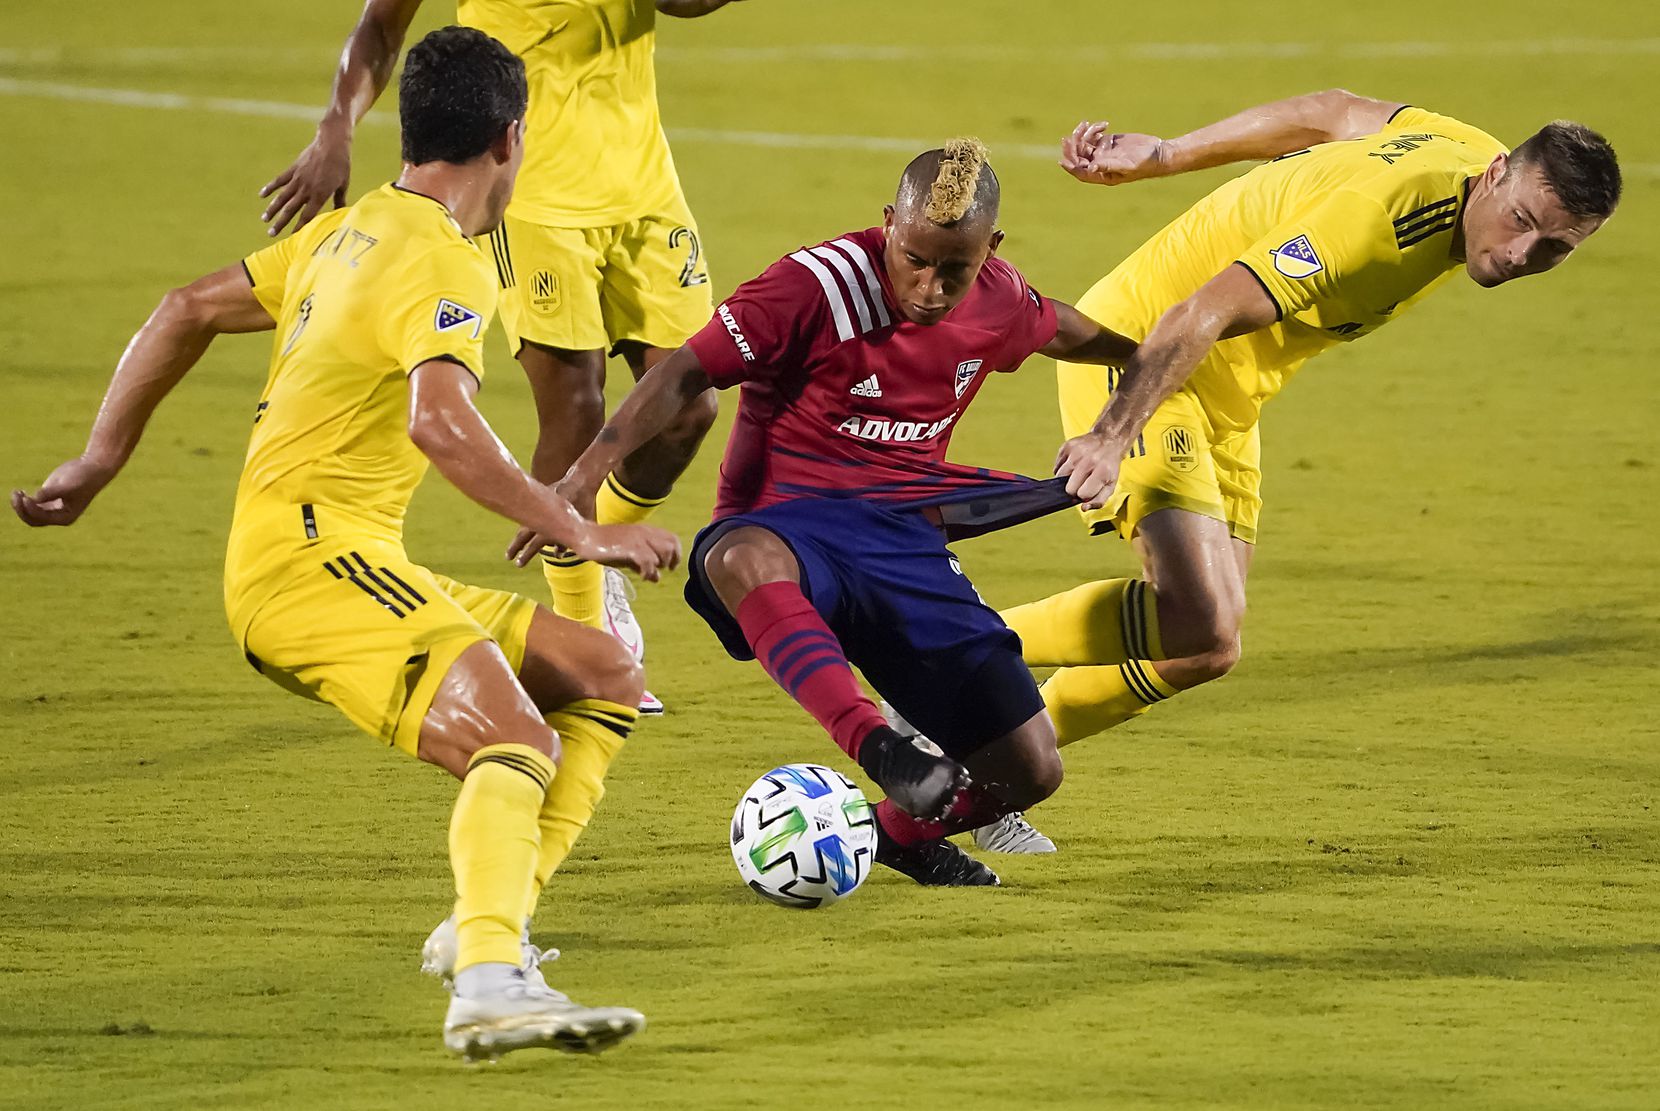 FC Dallas midfielder Michael Barrios (21) has his jersey pulled by Nashville SC defender Dave Romney (4) during the first half of an MLS soccer game at Toyota Stadium on Wednesday, Aug. 12, 2020, in Frisco, Texas. (Smiley N. Pool/The Dallas Morning News)